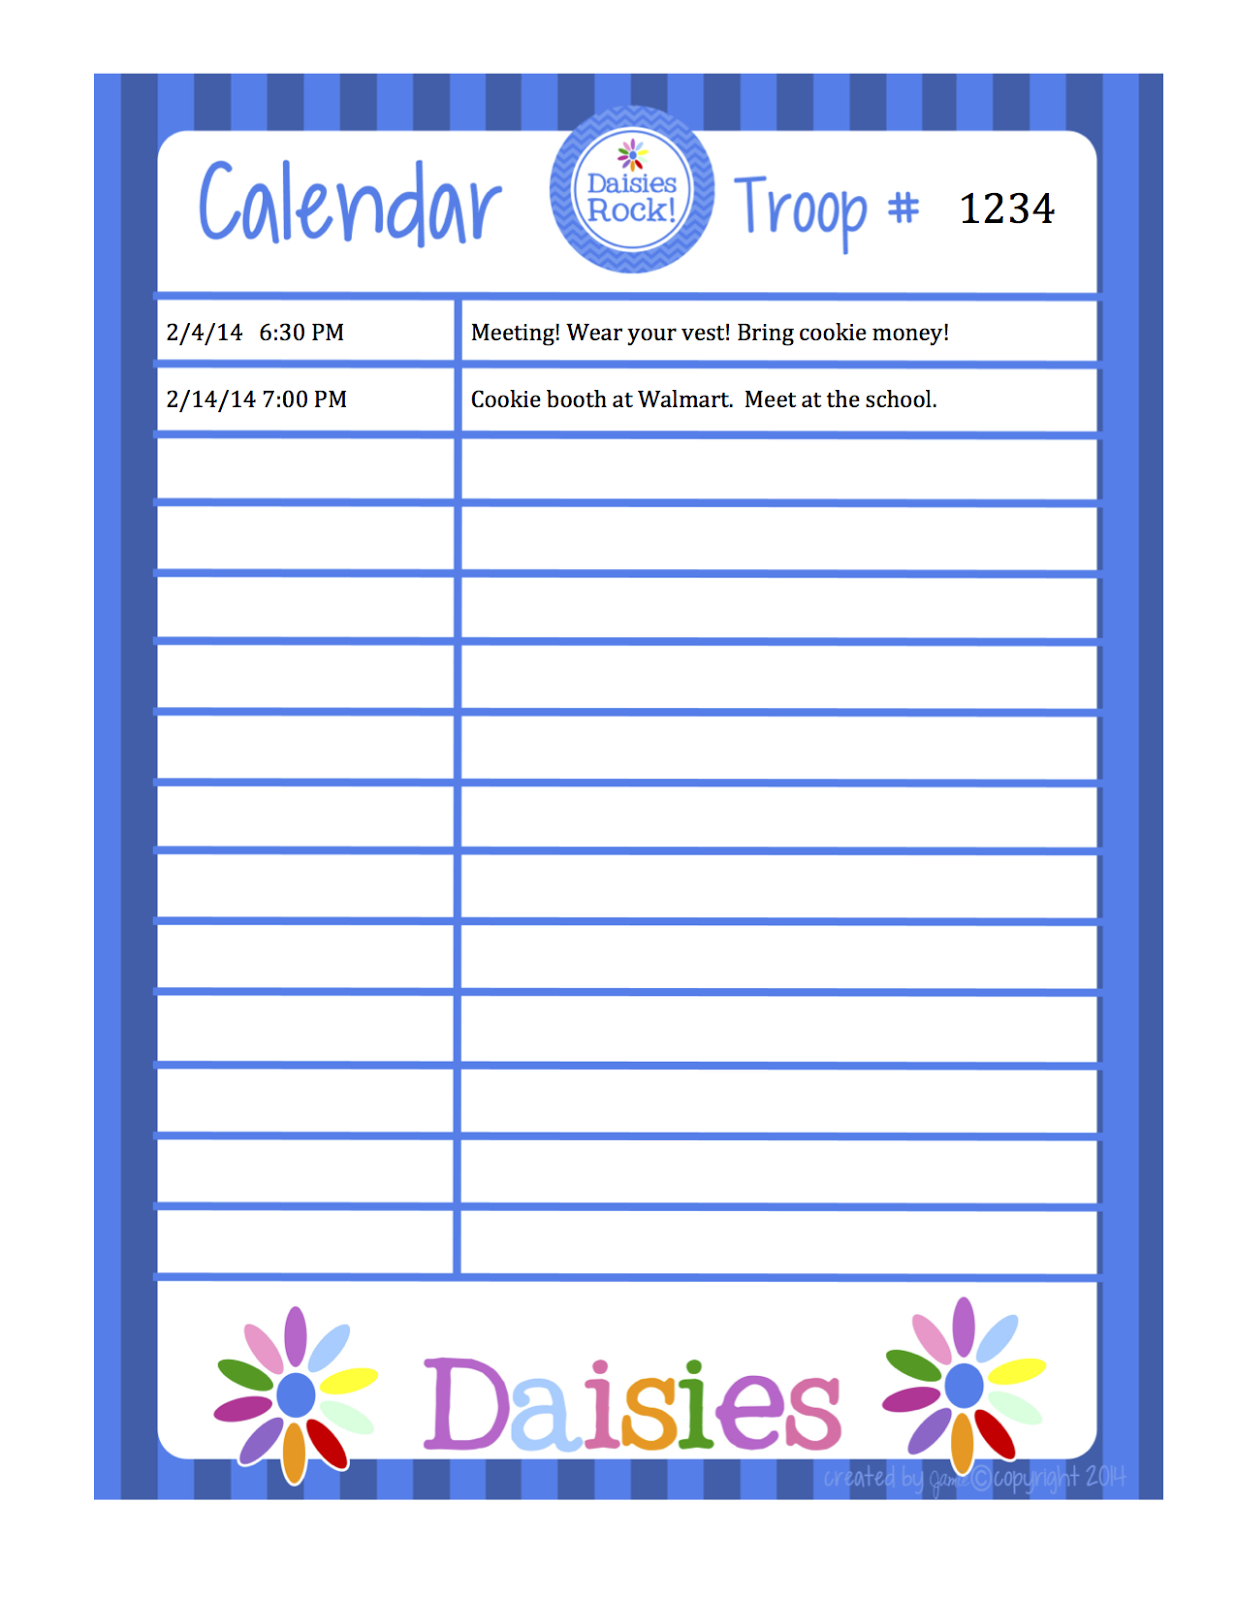 Fashionable Moms: Girl Scouts - Daisies Calendar (Word